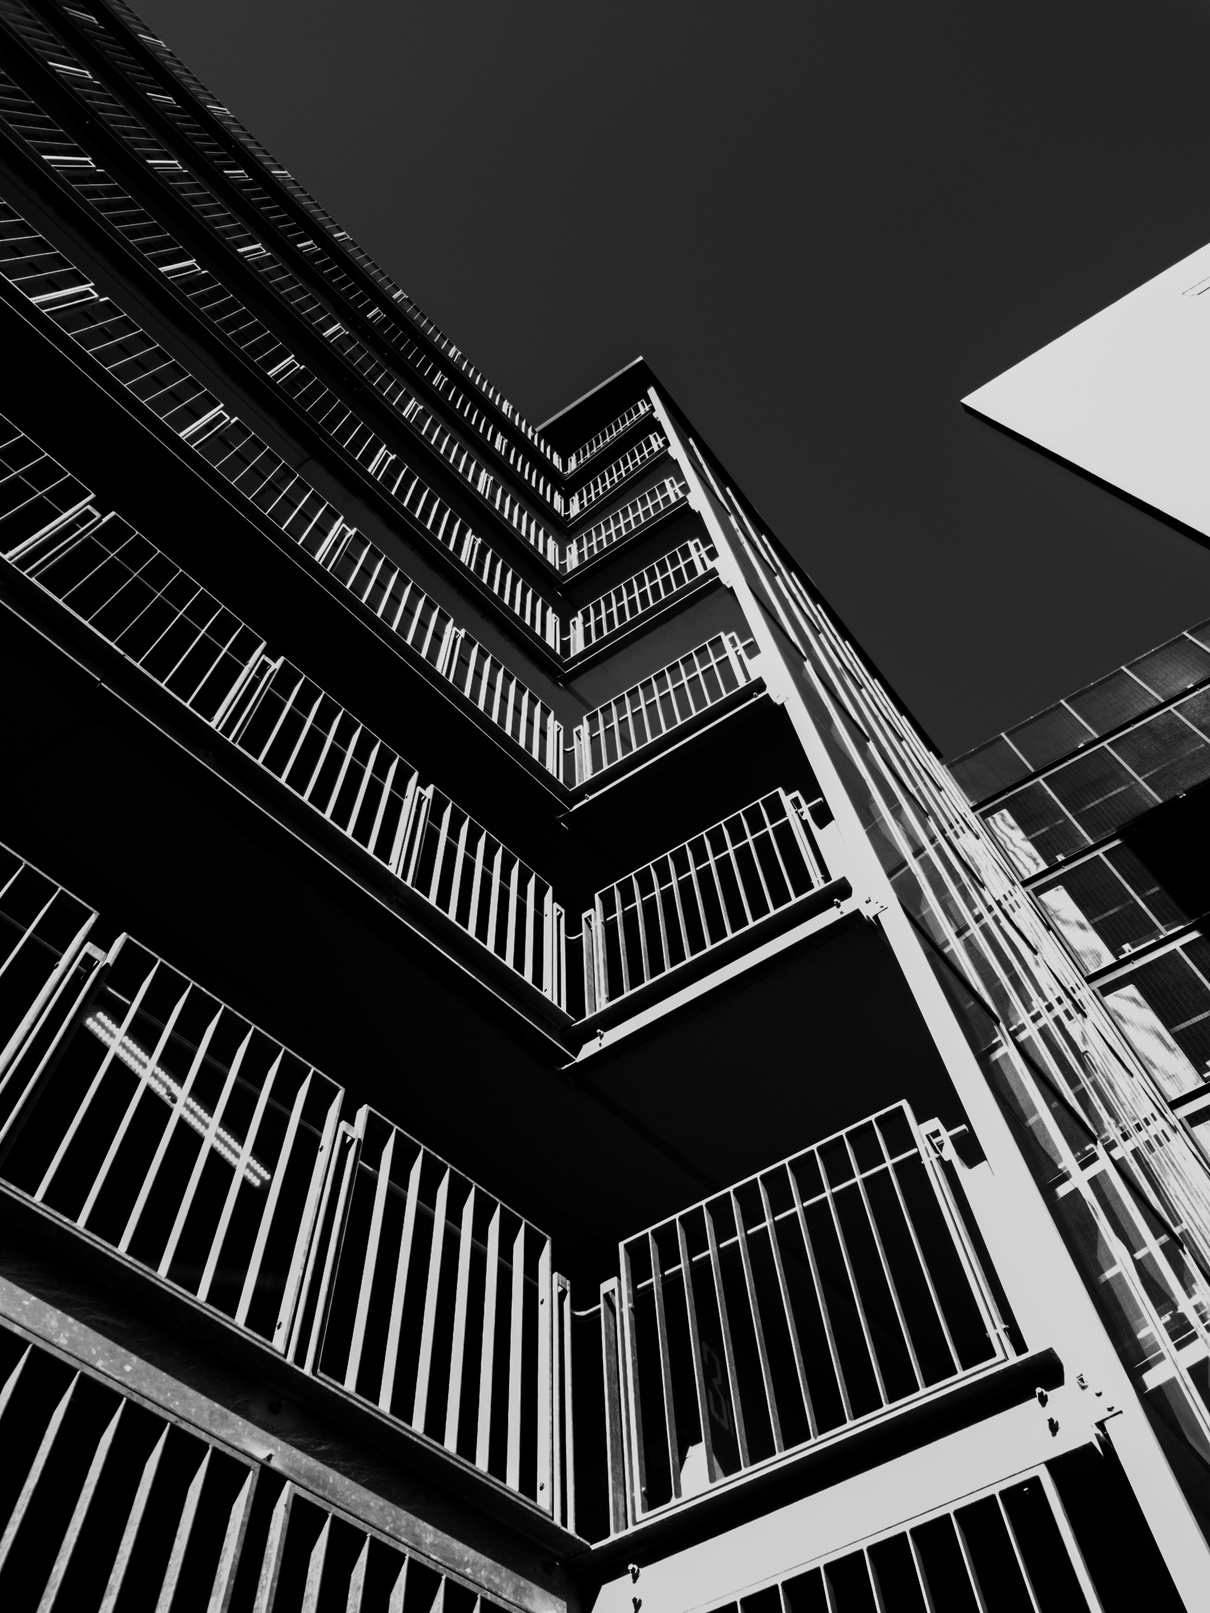 Architectural Photography of White and Black Building